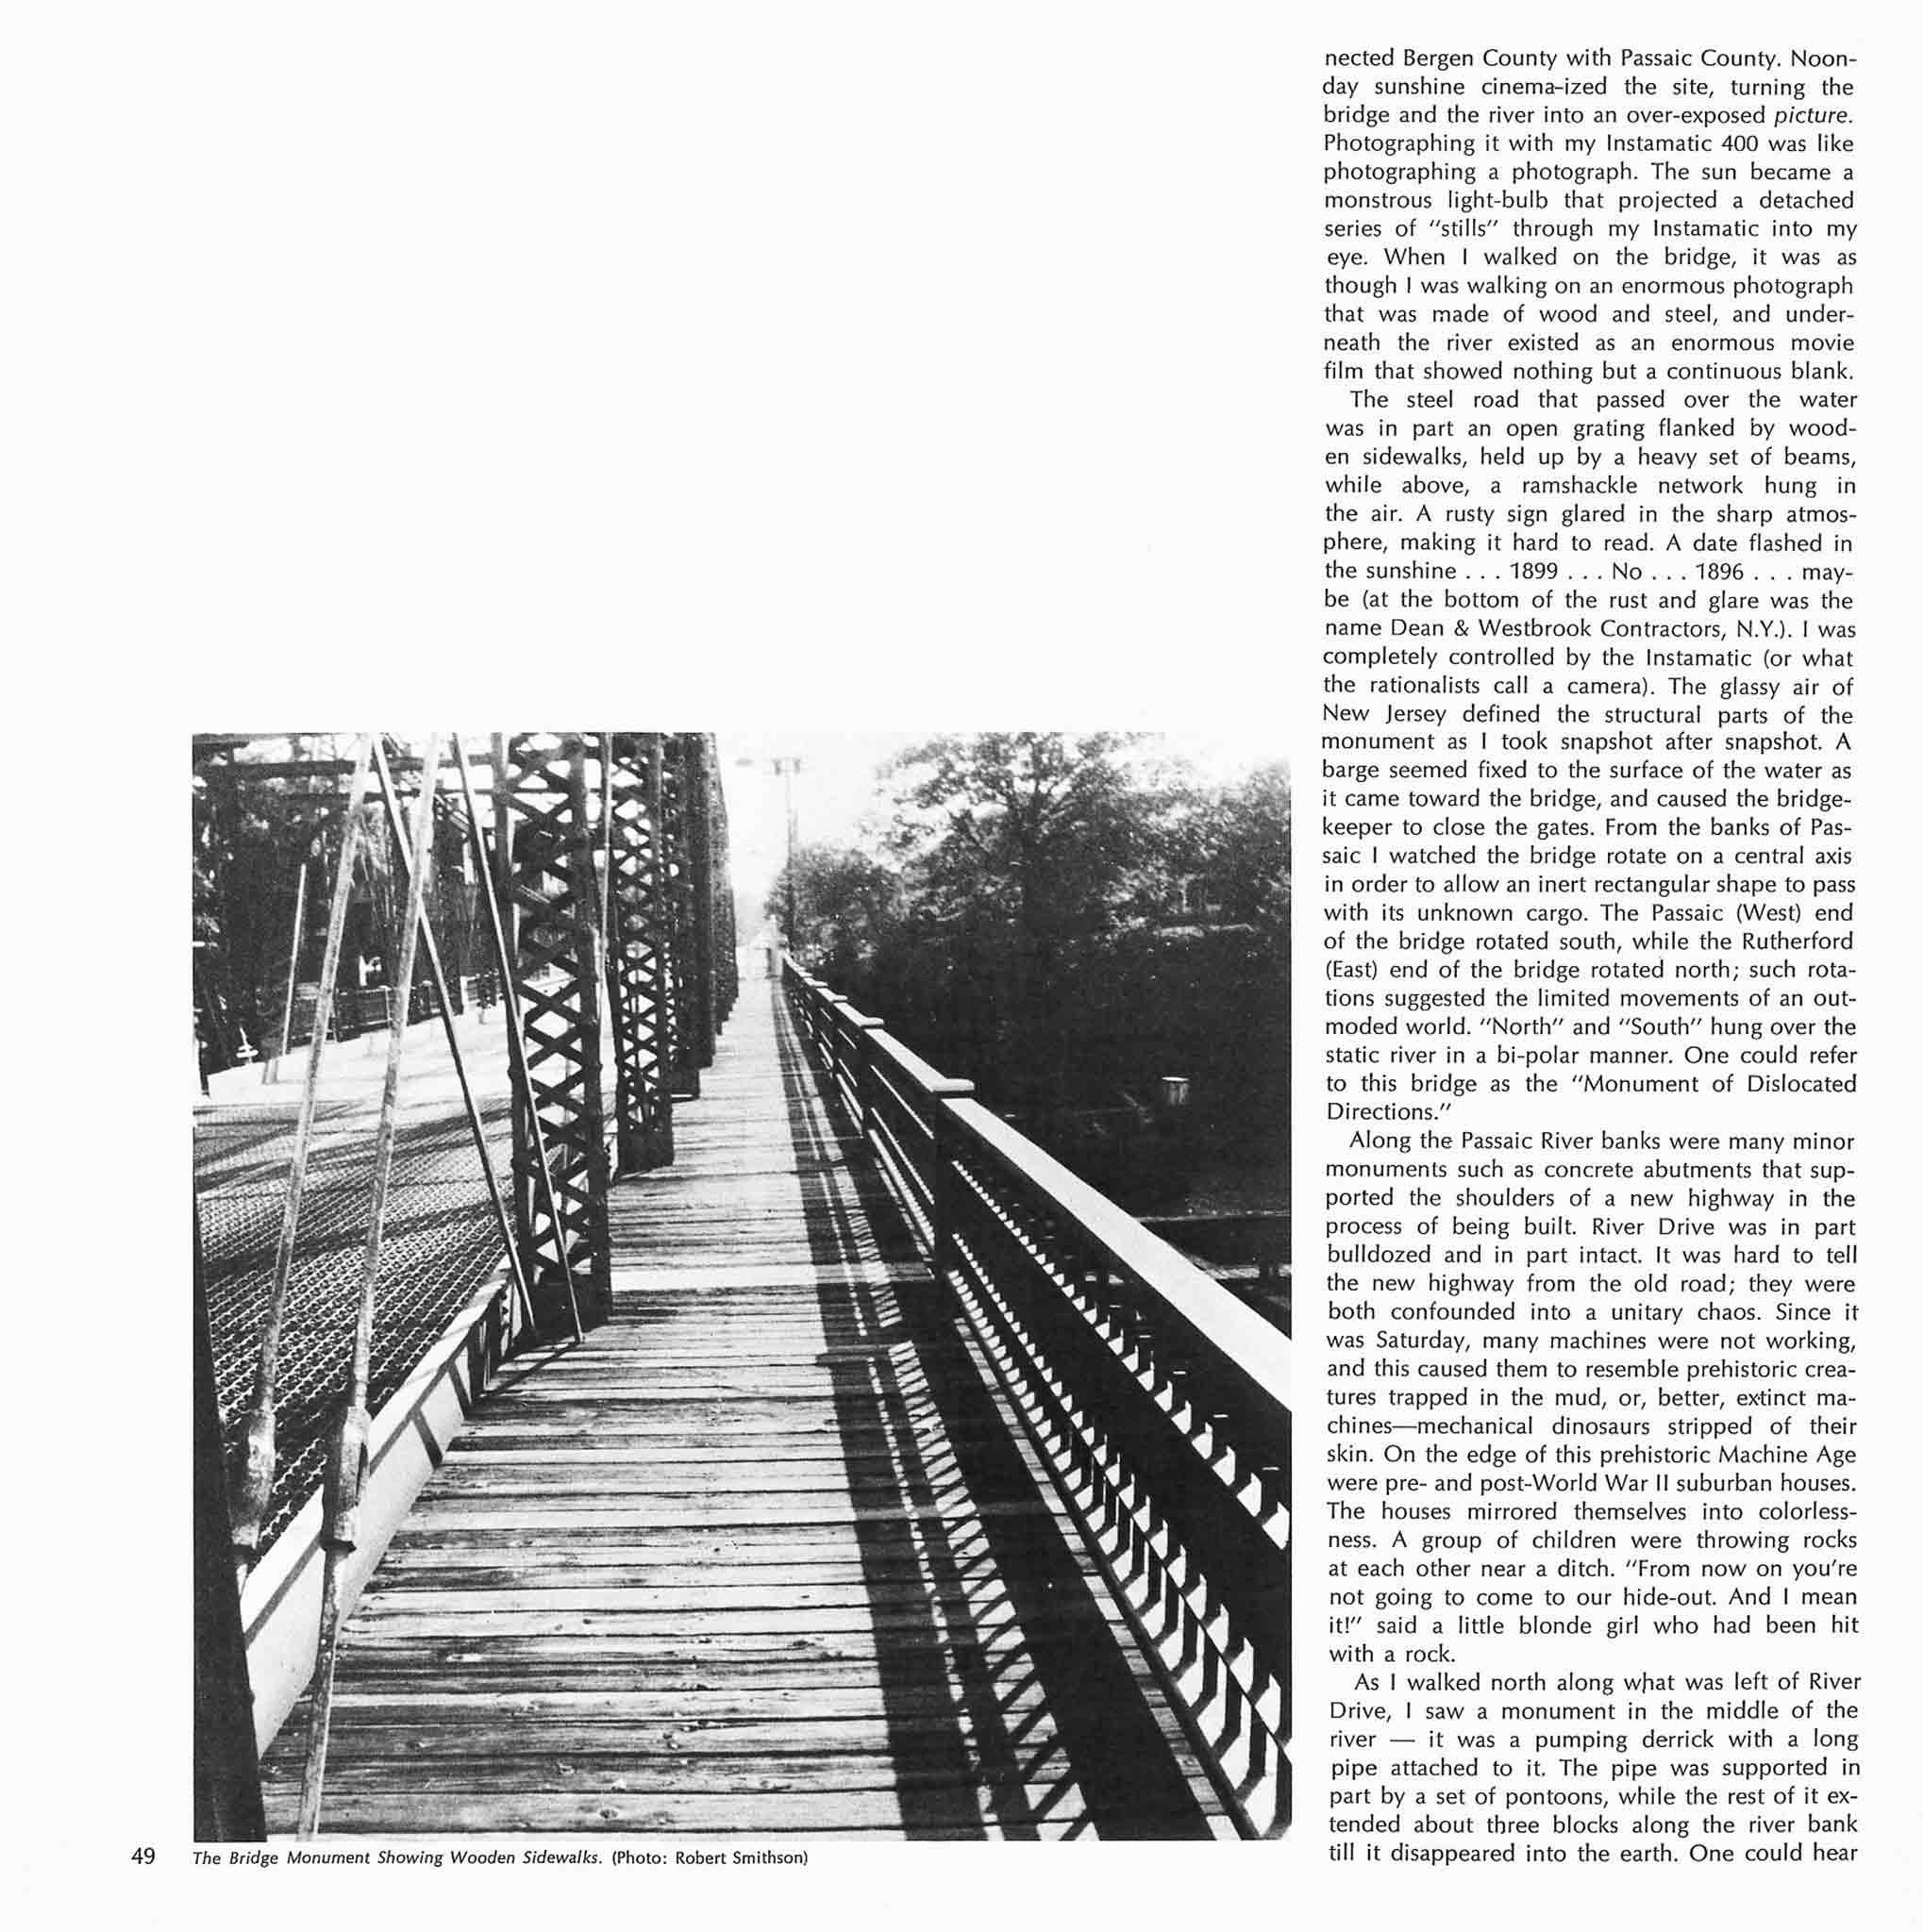 Magazine layout with one large black and white image of a walkway on a bridge on the left and a column of text on the right.